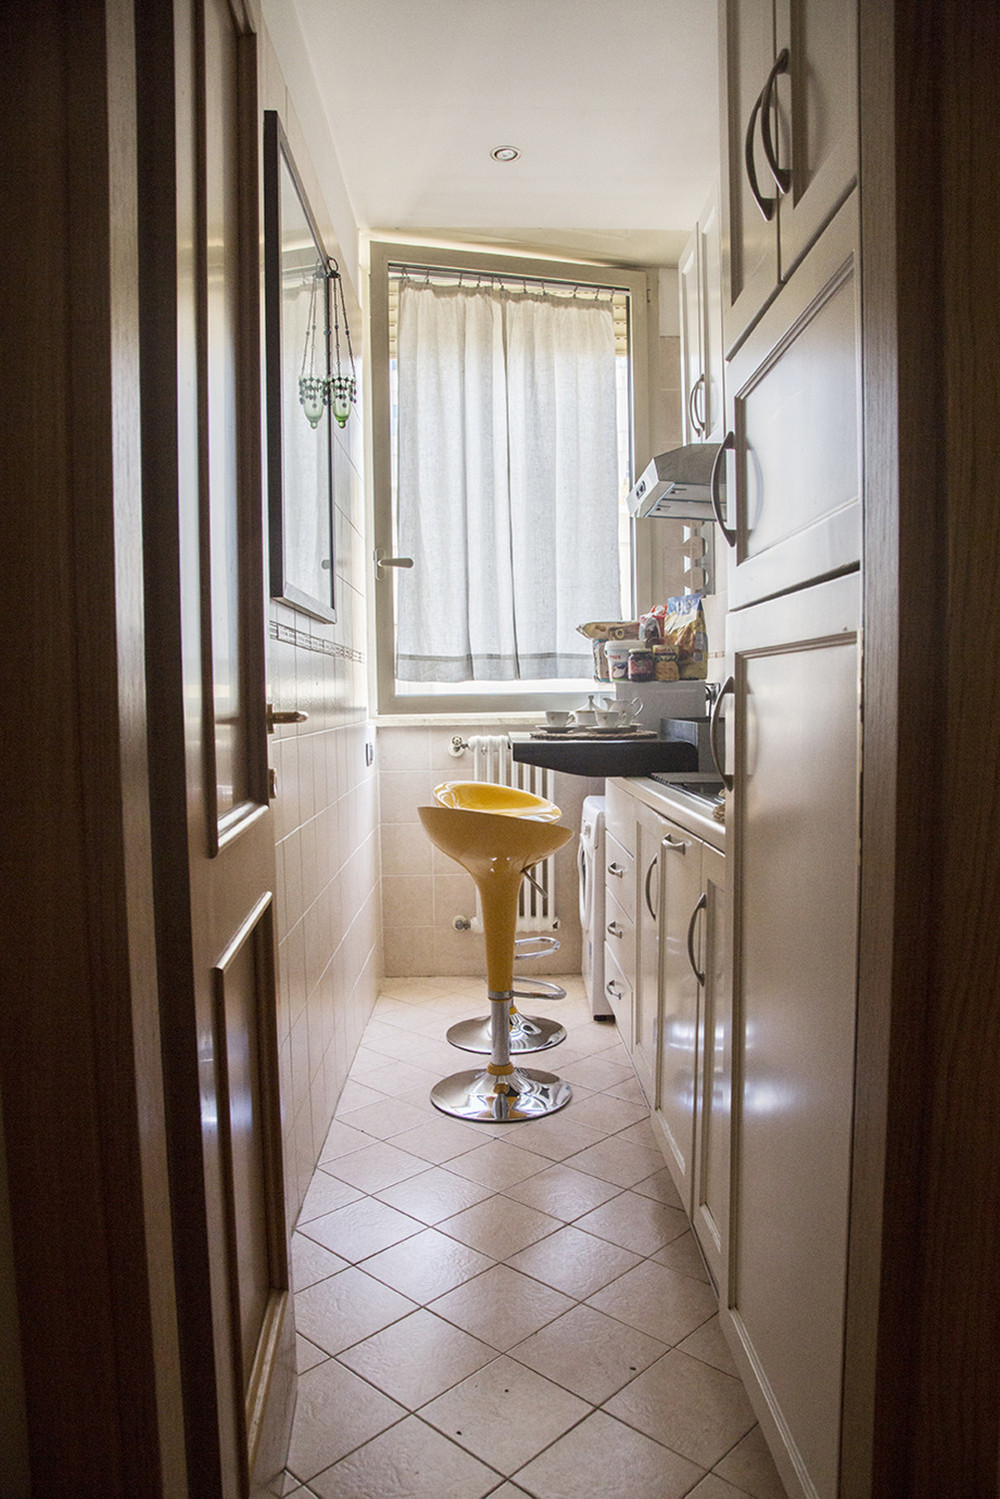 CHIC FLAT CENTRE ROME, 2 bedrooms, 2 bathrooms